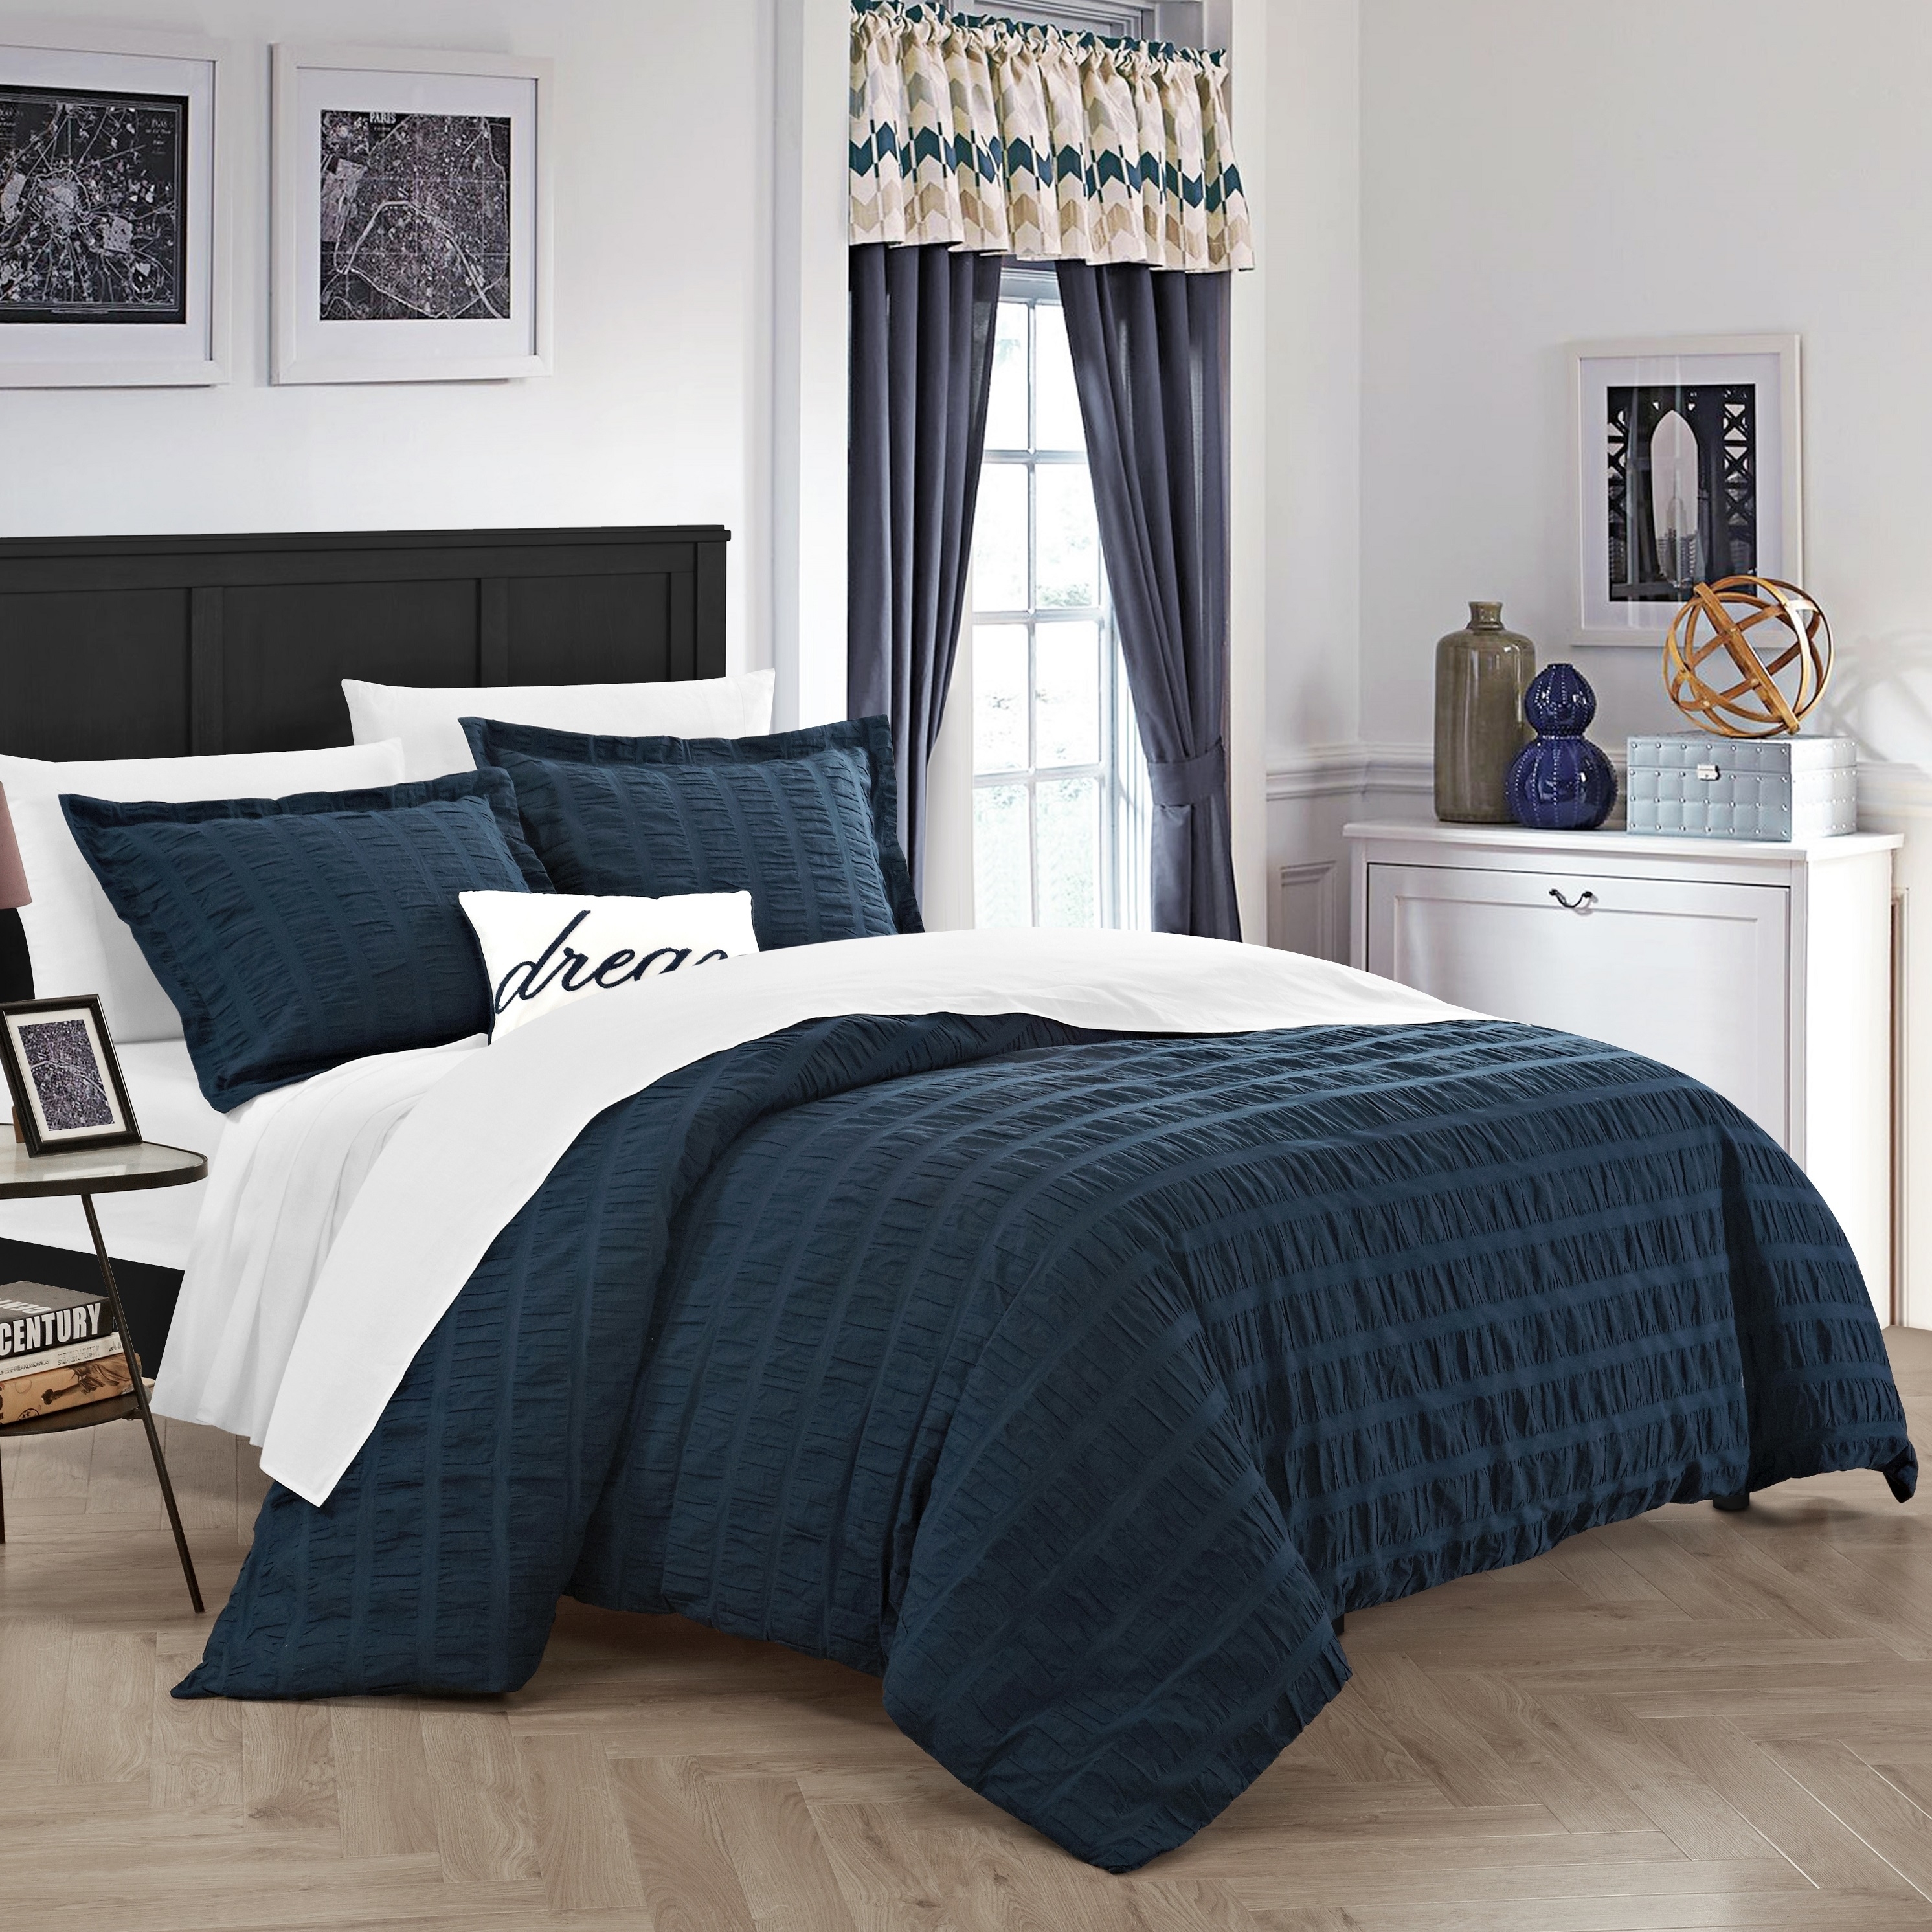 Calamba 4 Piece Duvet Cover Set 100% Cotton 200 Thread Count Ruched Ruffled Striped Design Zipper Closure - Navy, King